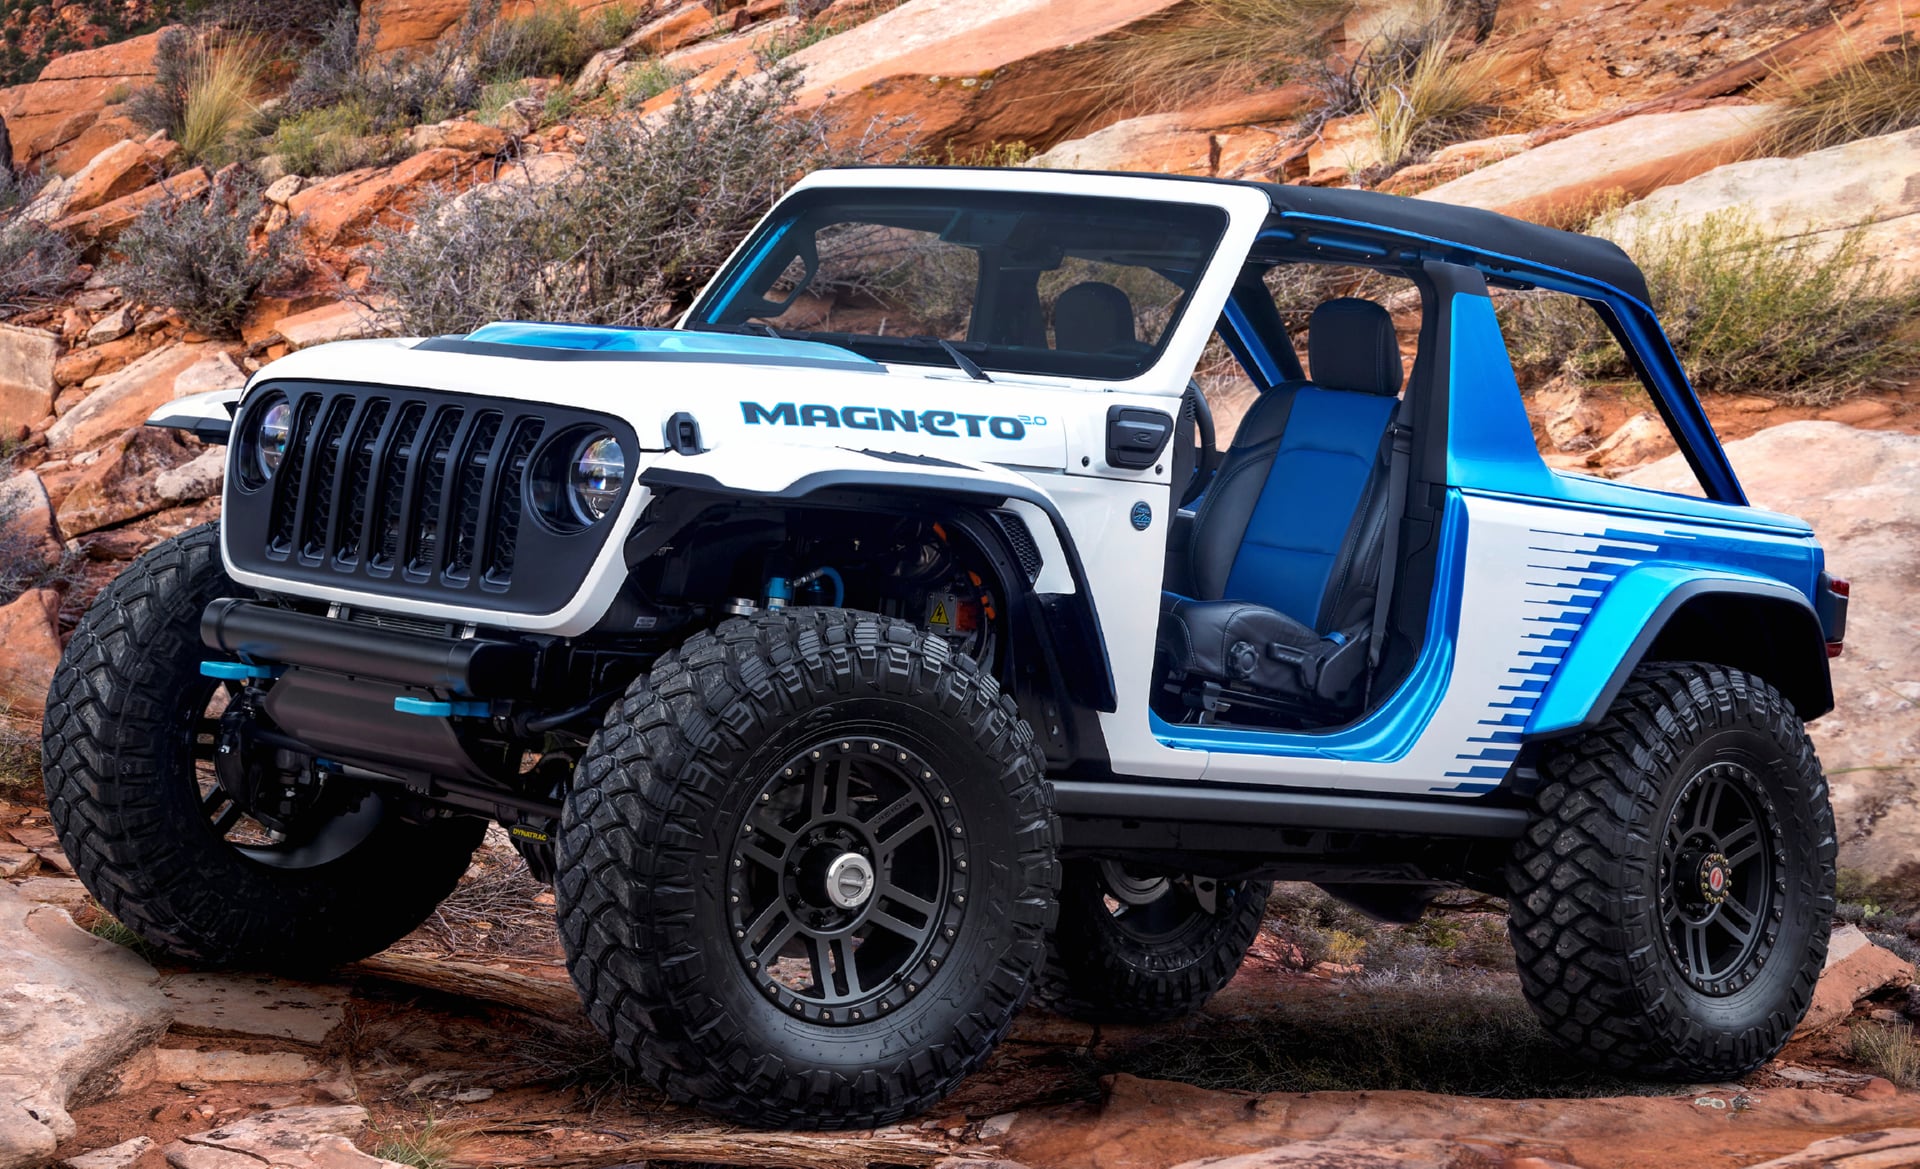 Jeep Wrangler Magneto wallpapers HD quality